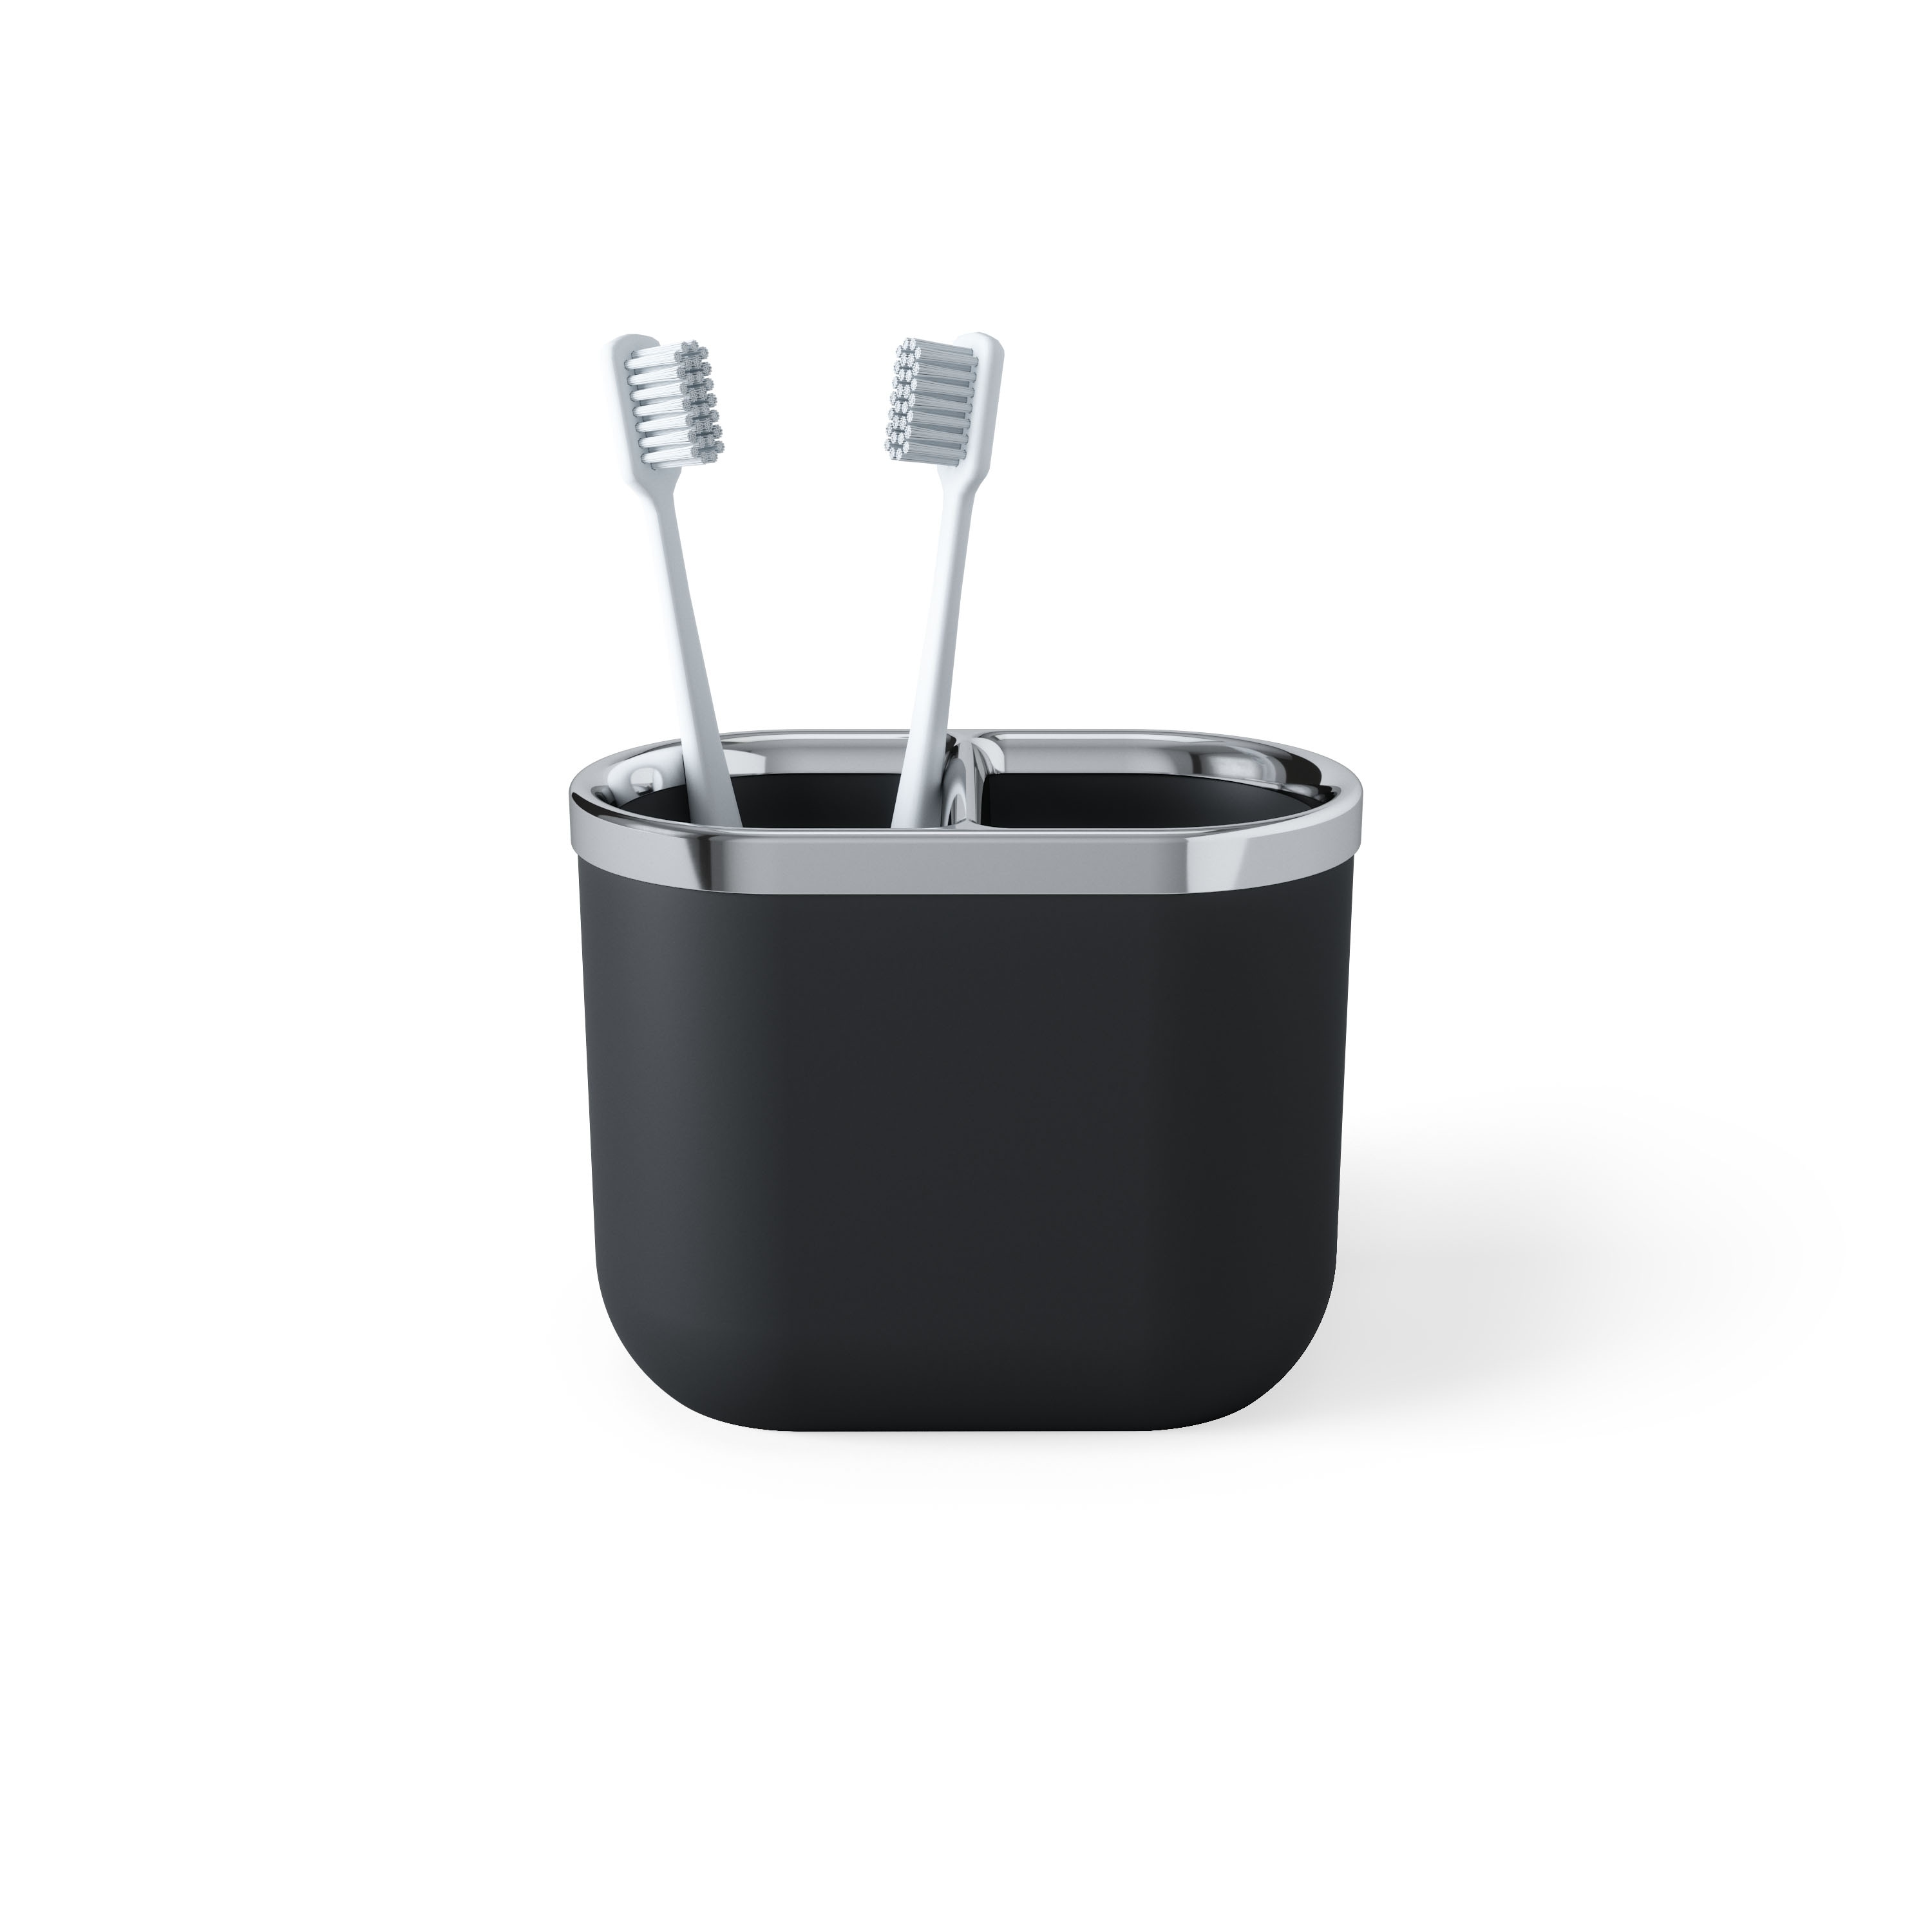 Buy Stylish Tooth Brush Holder - Silver & Black at the best price